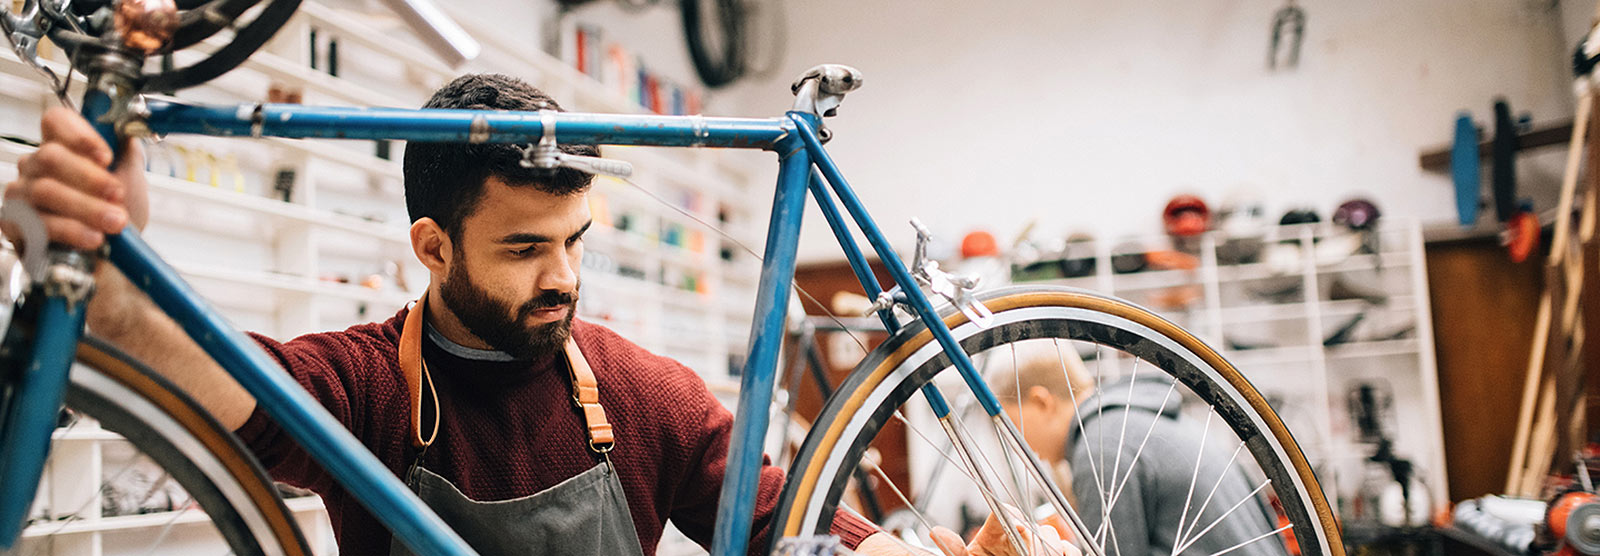 Male business owner fixing bicycle in shop